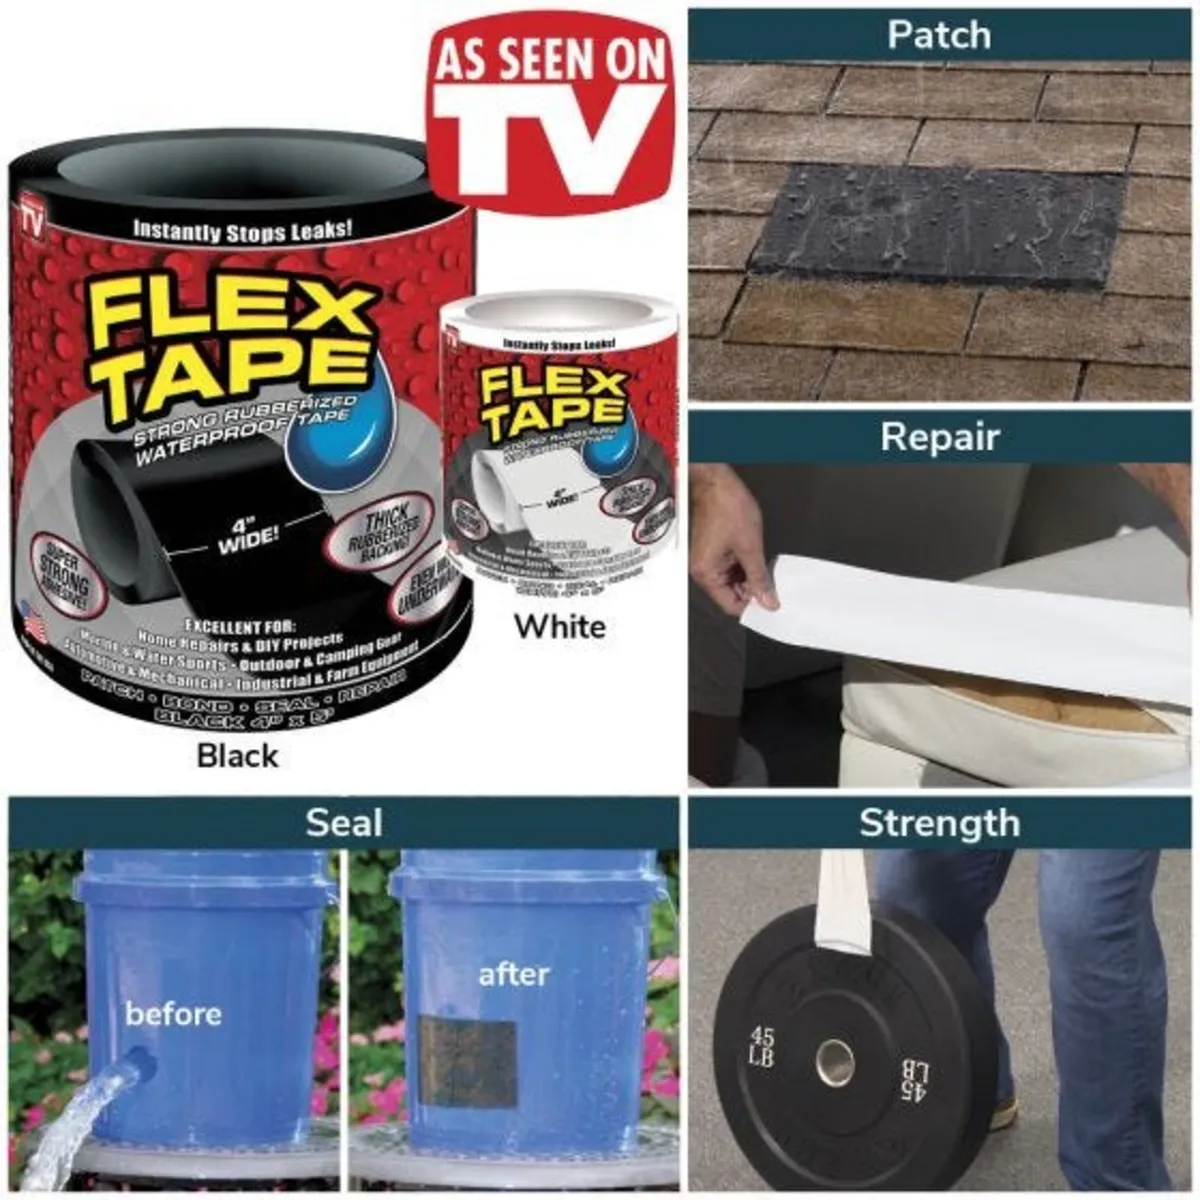 Flex Tape SUPER STRONG TAPE Clear or Black - Image 1